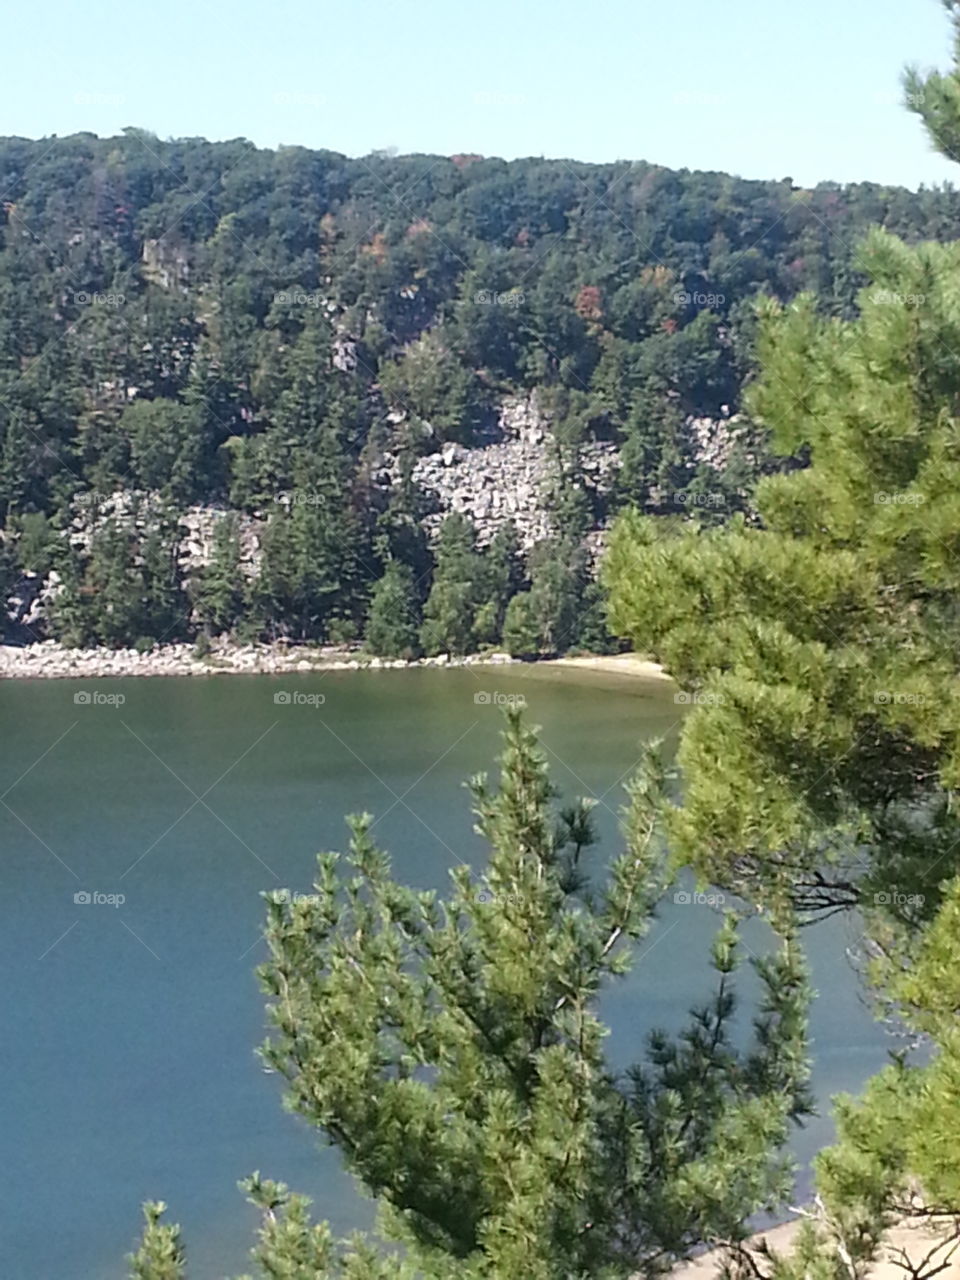 Devils Lake. hiking at the State park taking in the view